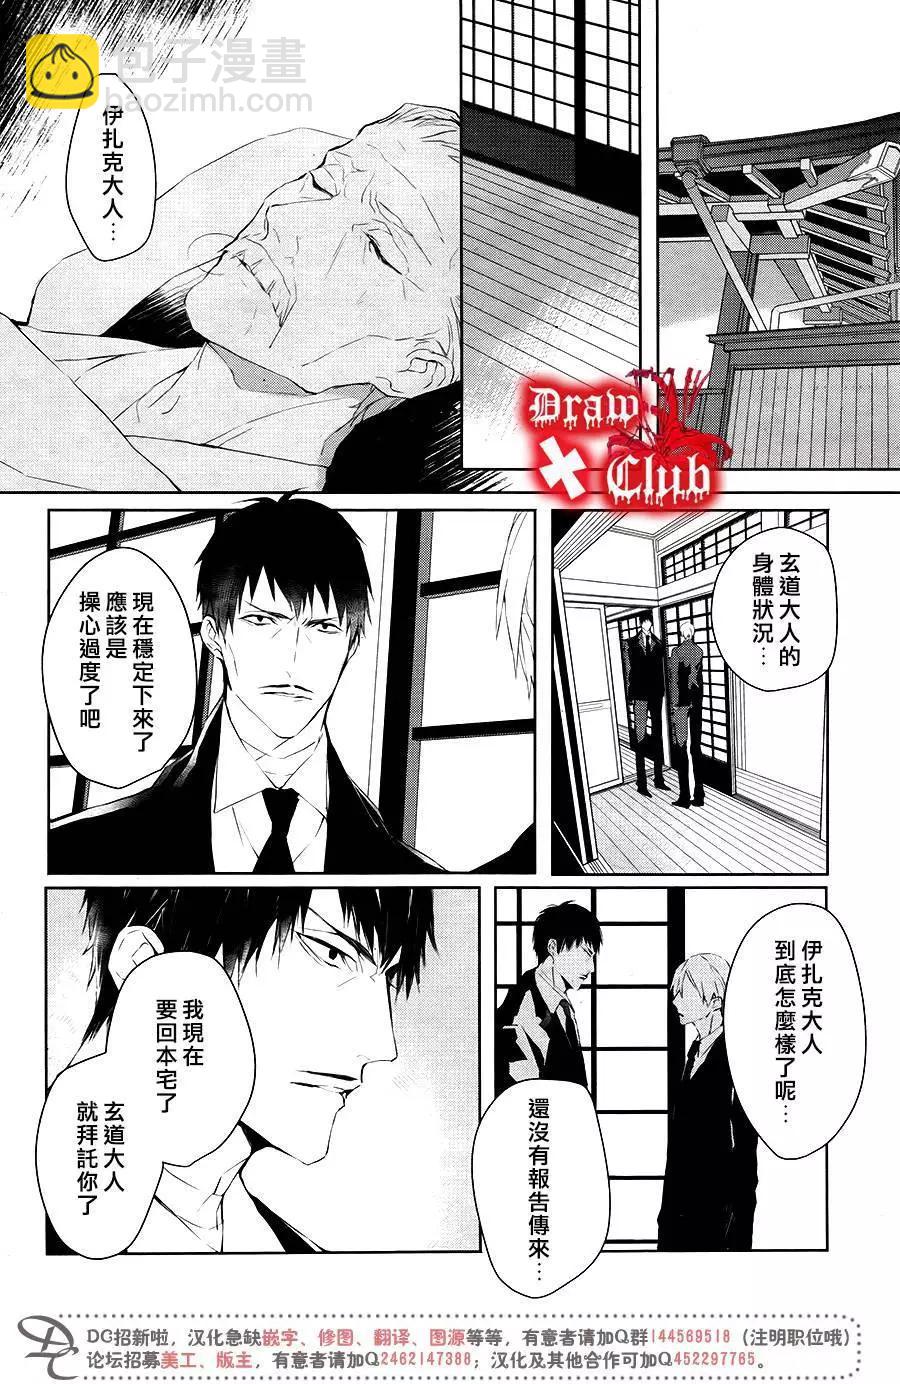 Bloody Mary - 第38回 - 5